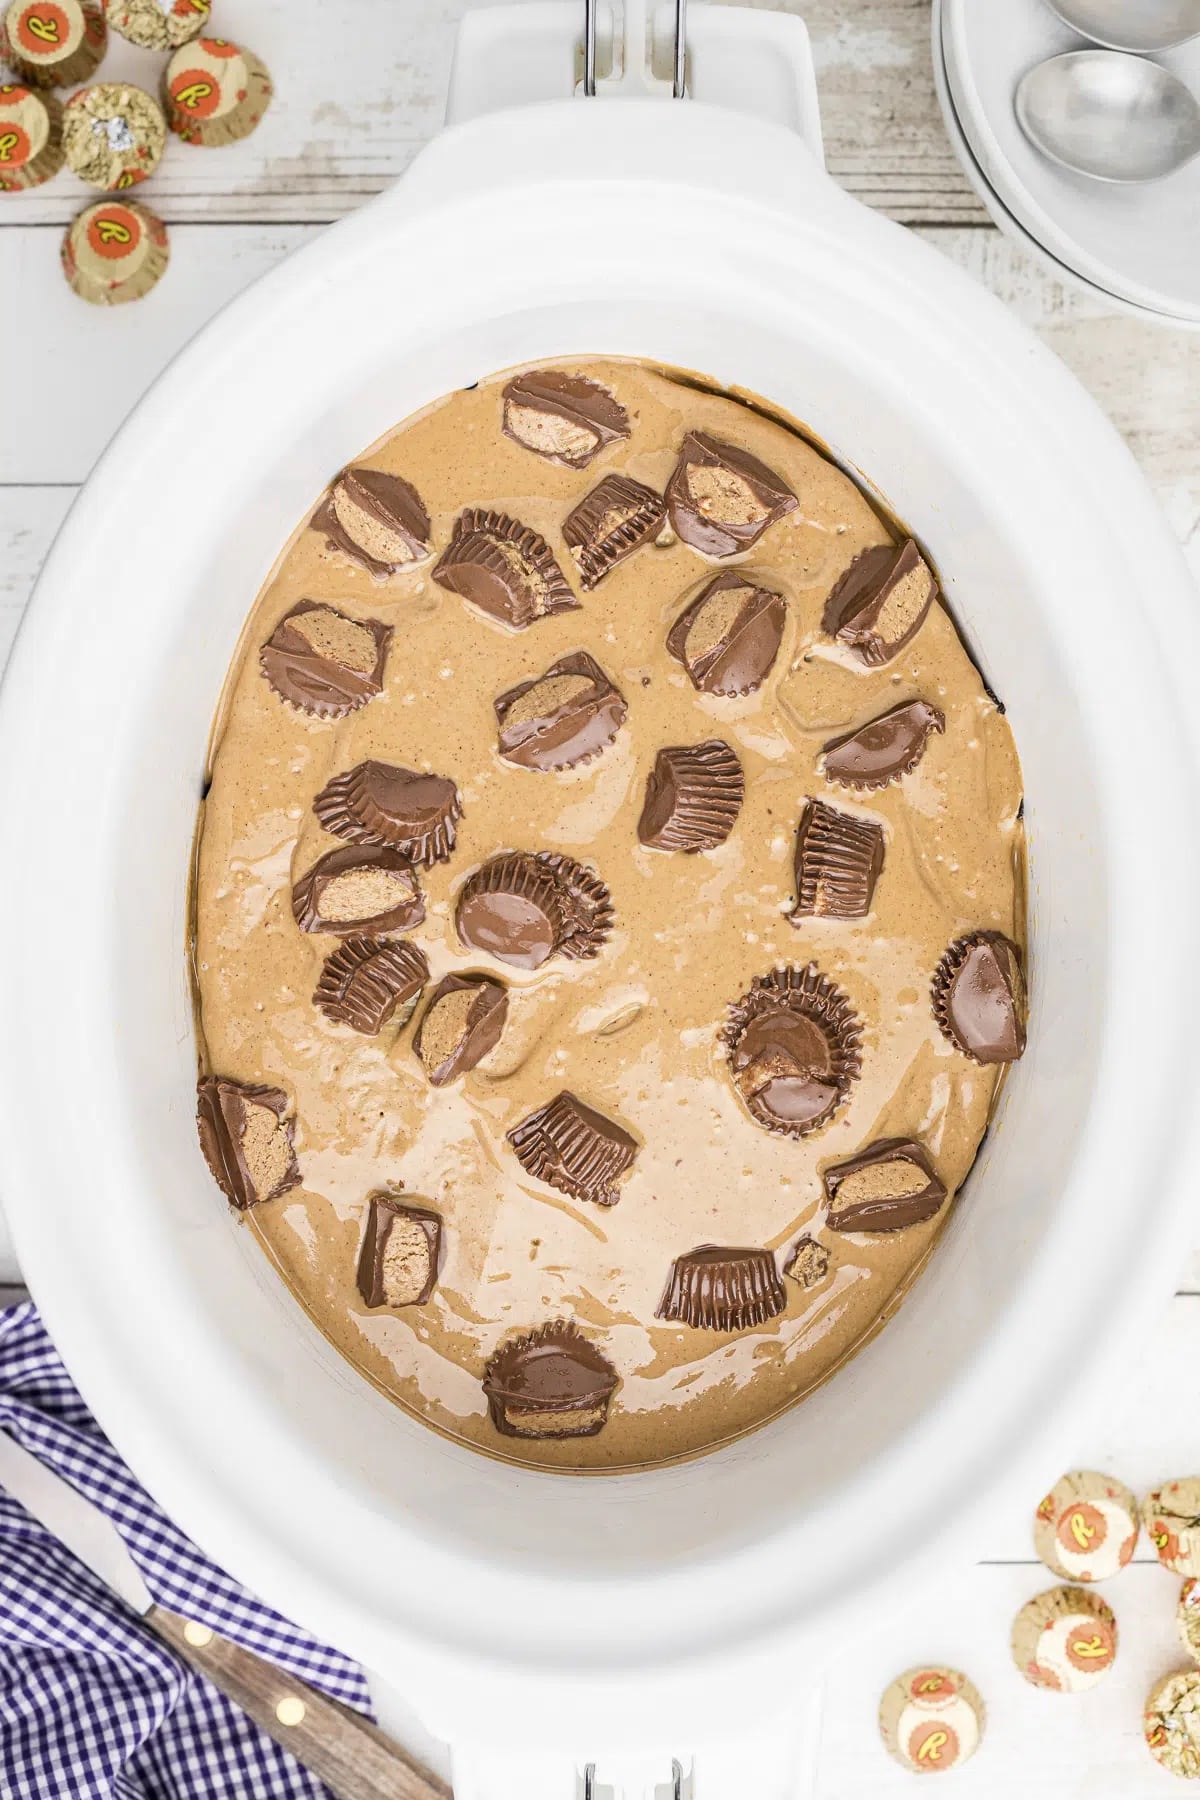 Reece's Peanut Butter Cup Chocolate Cake from The Magical Slow Cooker